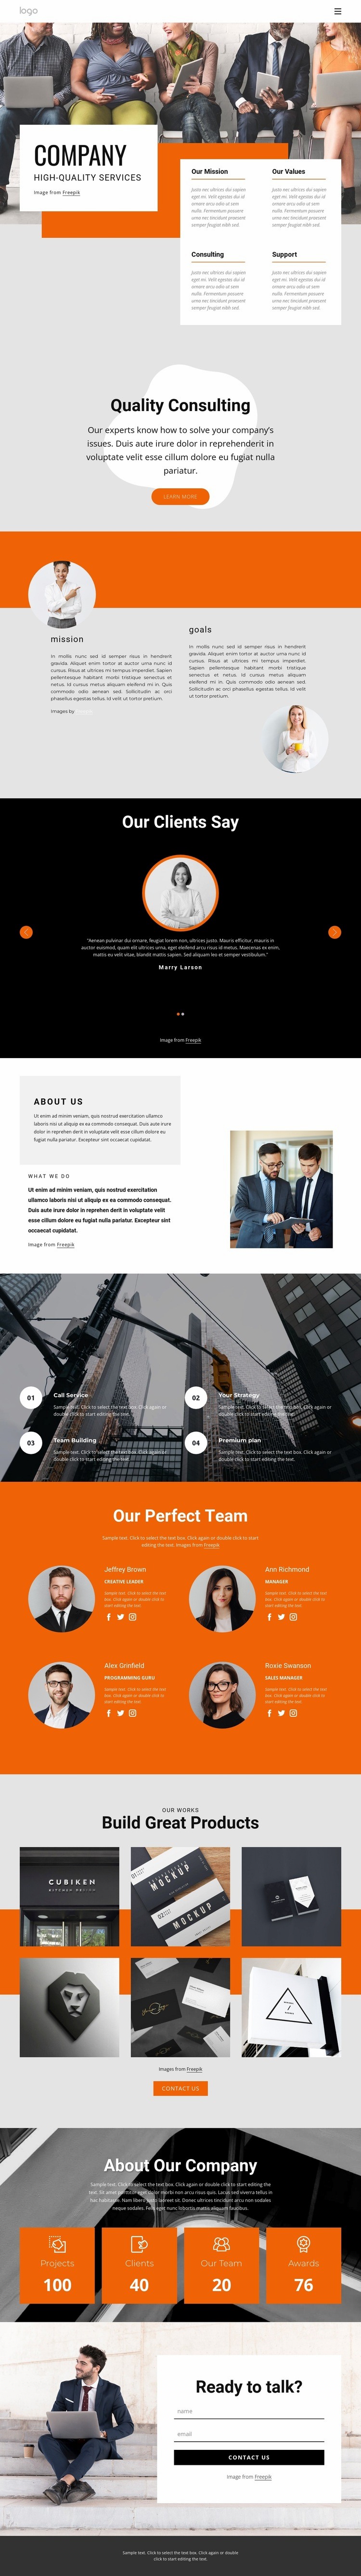 Hight quality consulting firm Wix Template Alternative